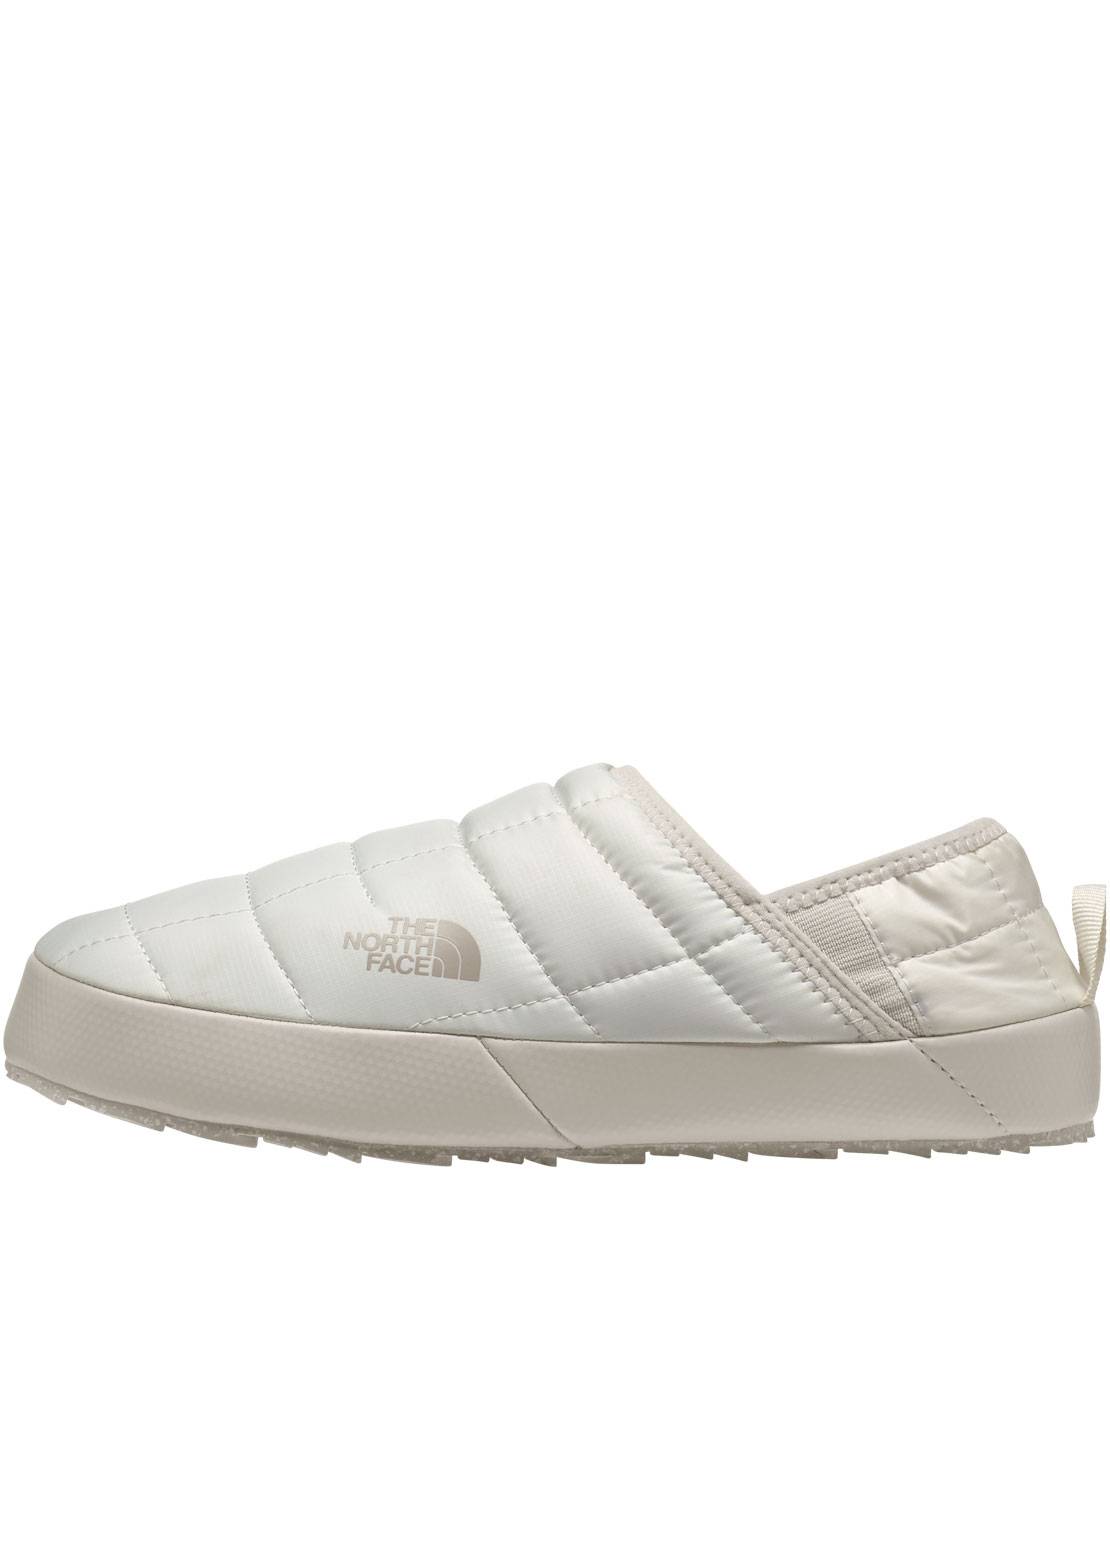 North Face Women's ThermoBall Mule V Slippers PRFO